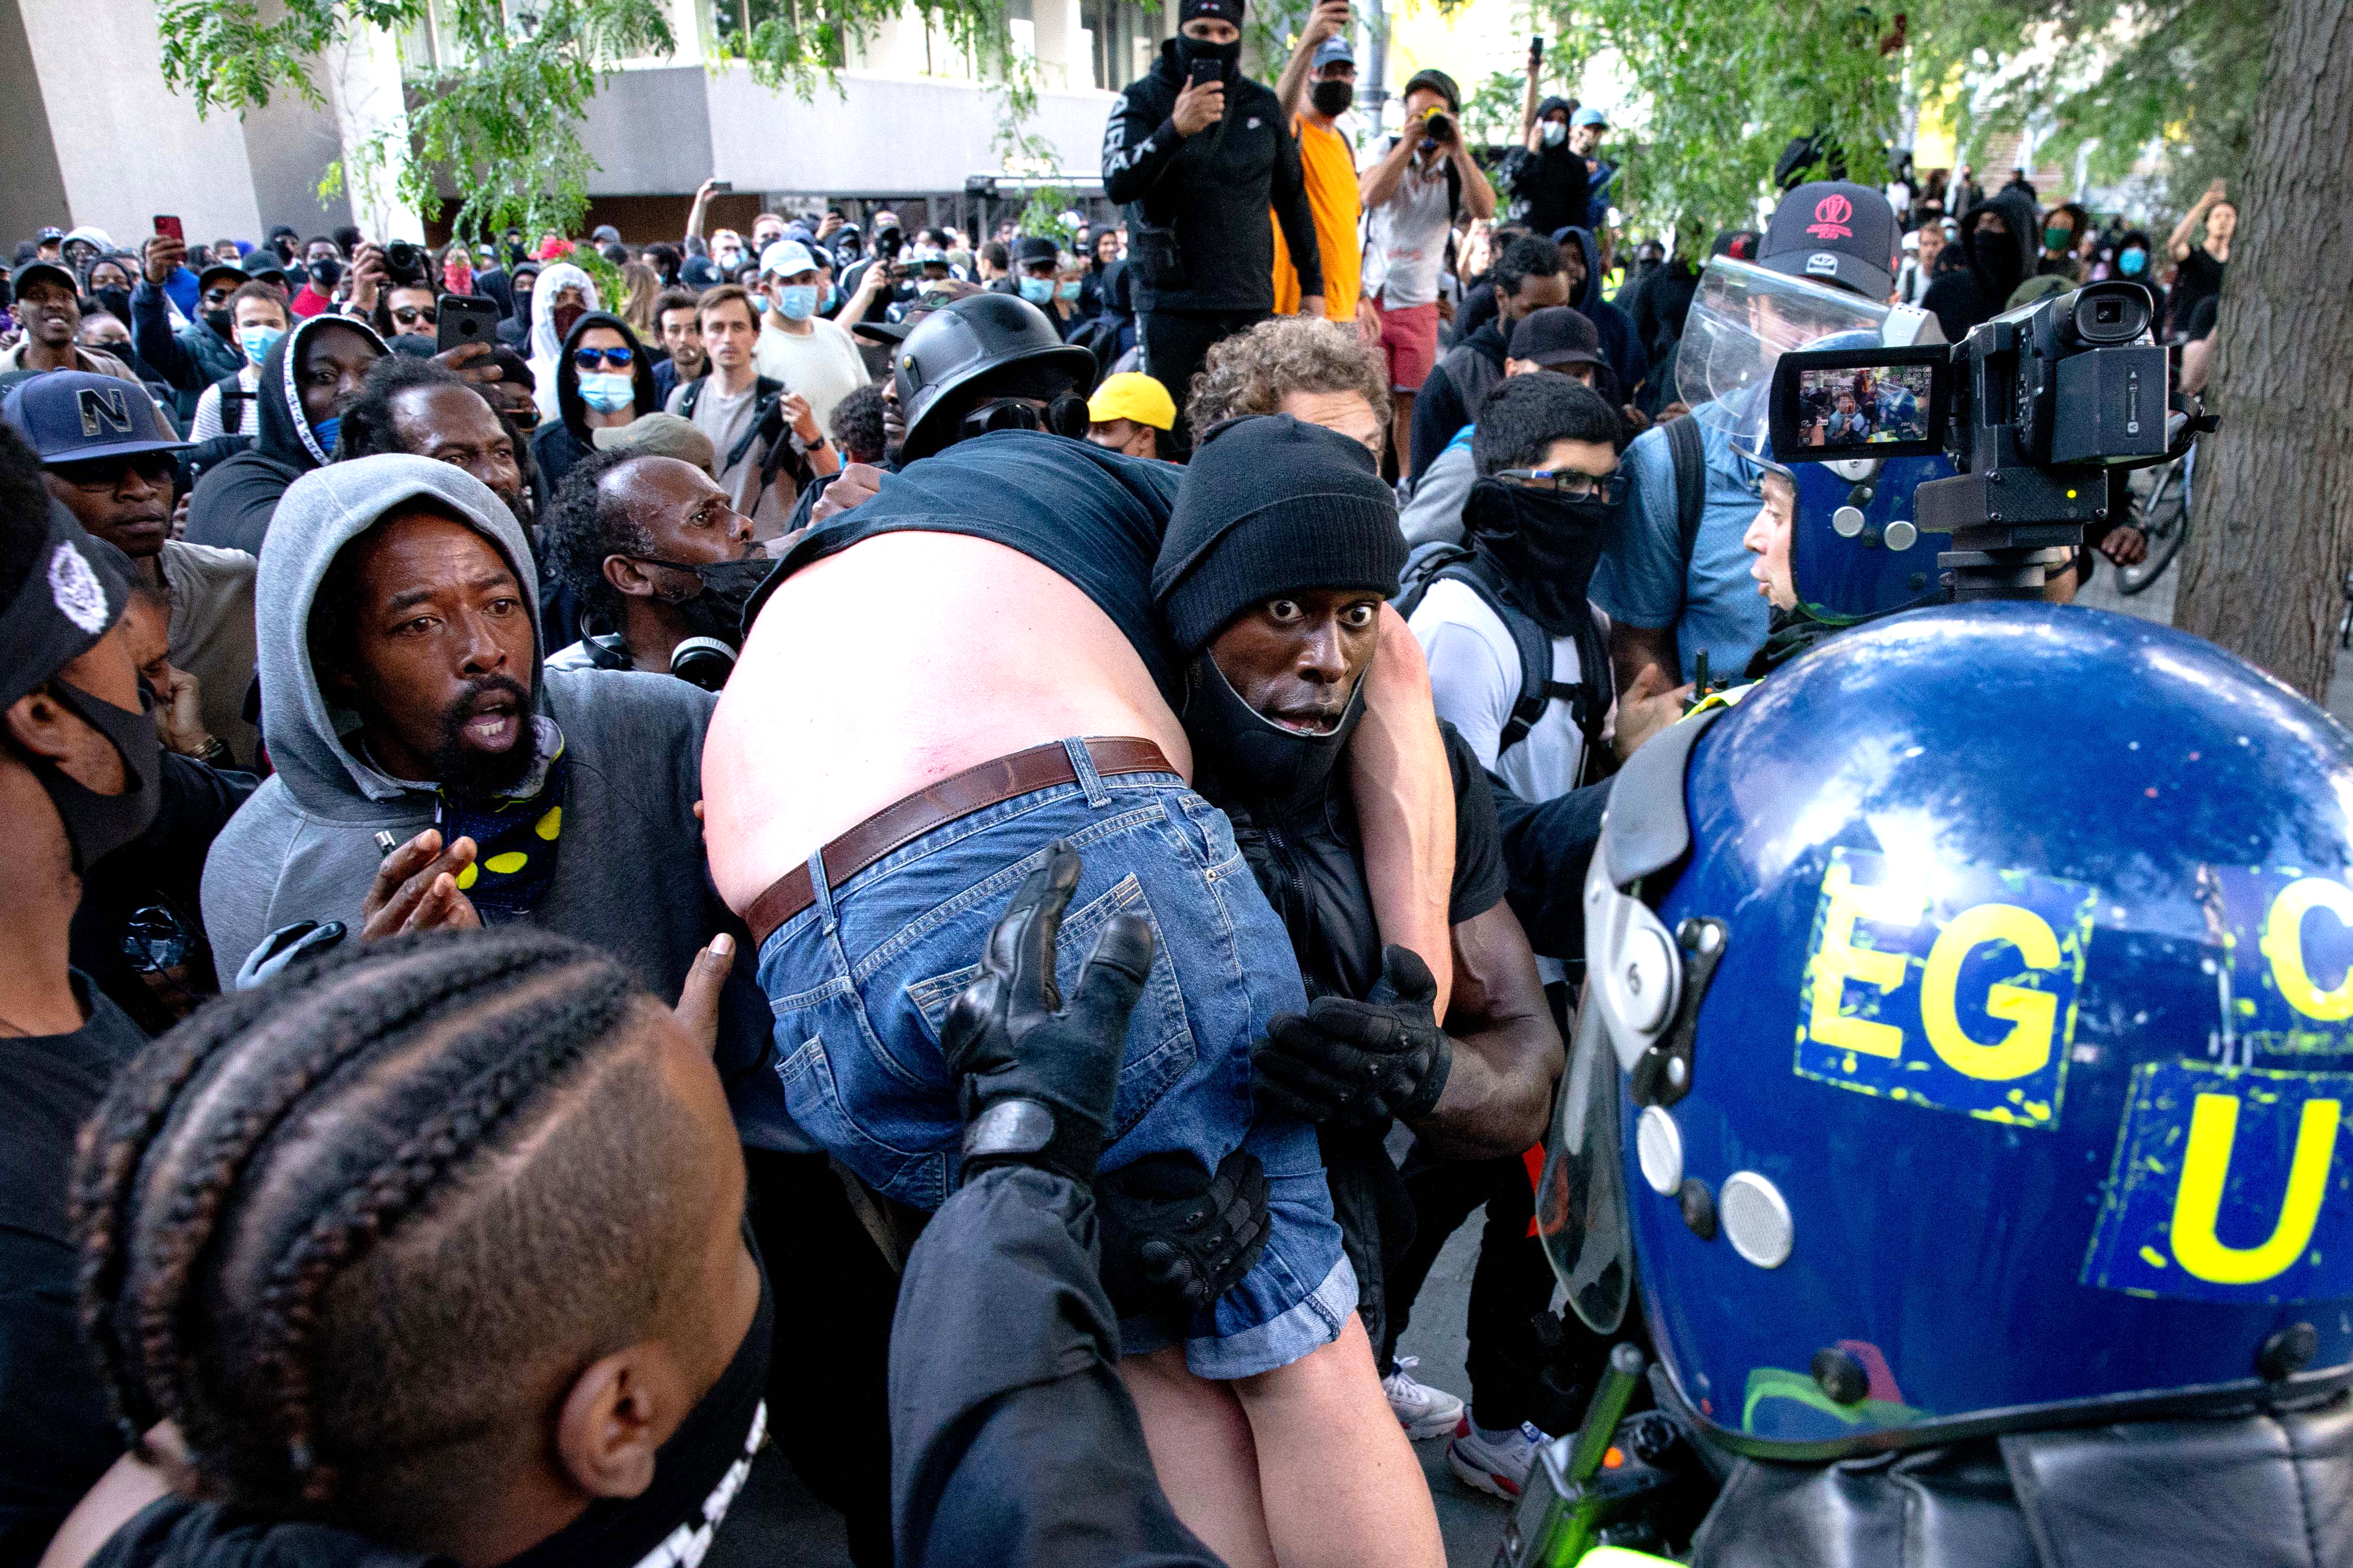 Patrick Hutchinson carries an injured man away after he was allegedly attacked by some of the crowd of protesters as police try to intervene on the Southbank near Waterloo station in London.